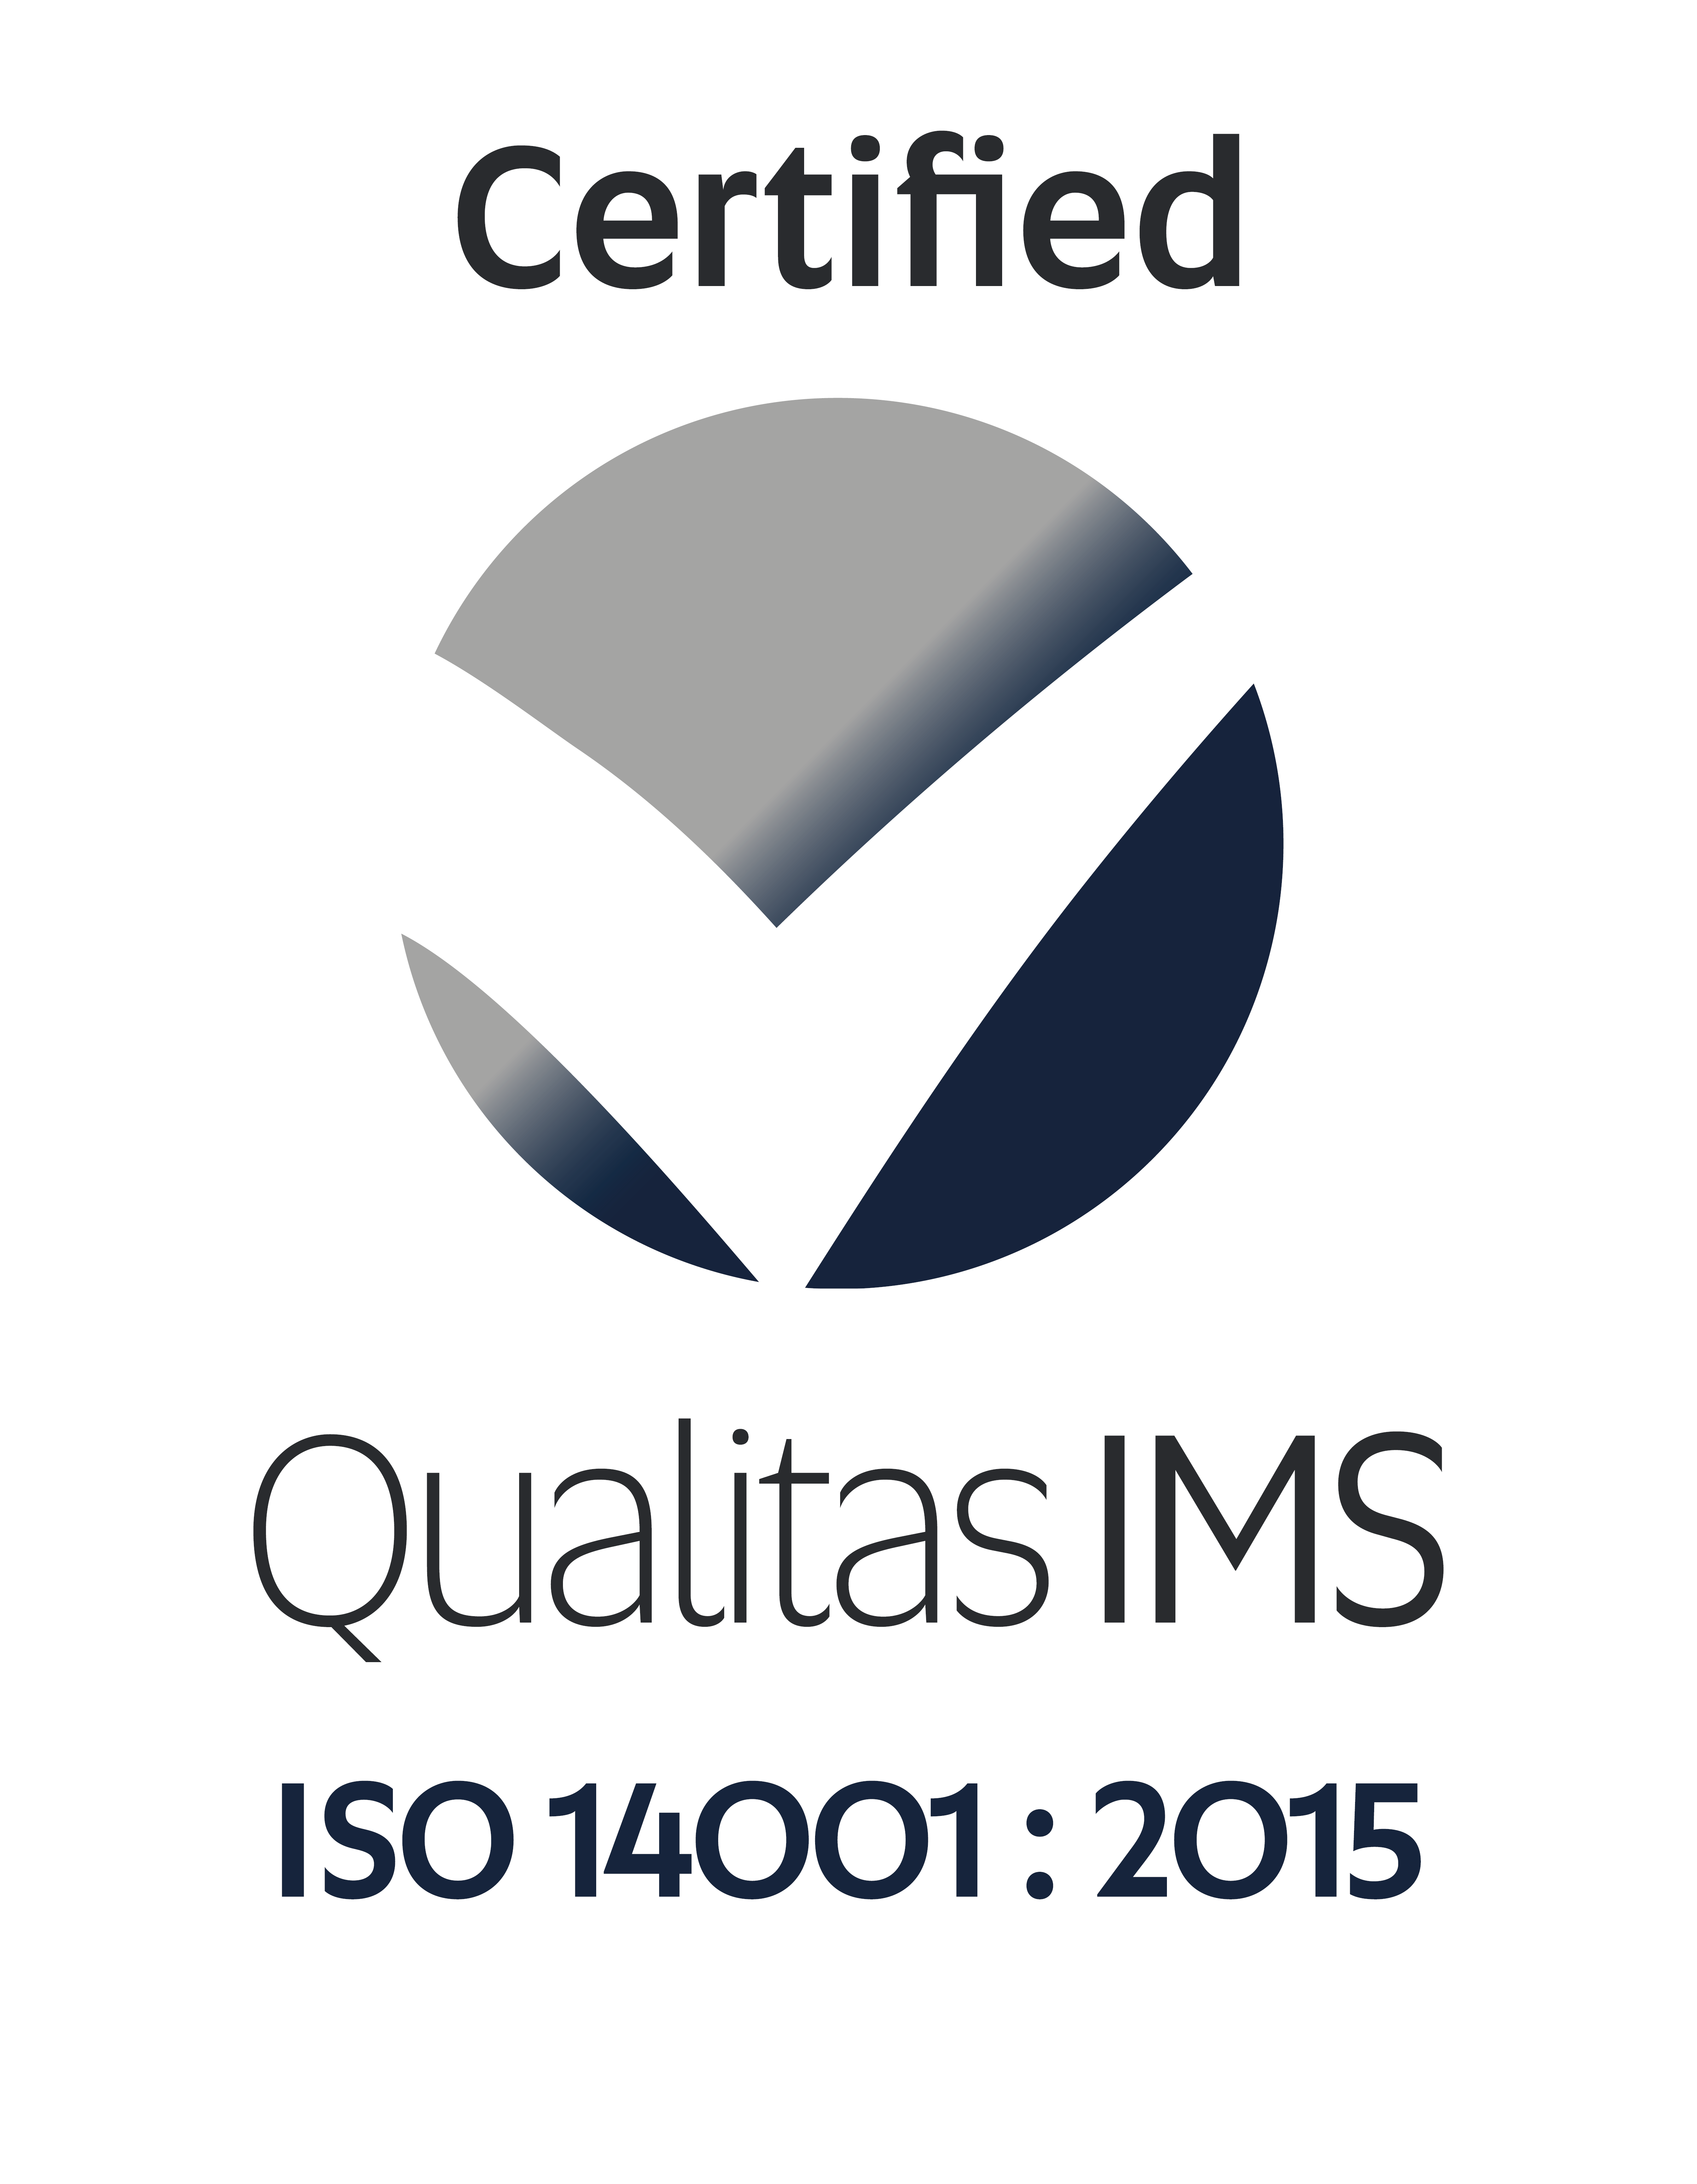 Certified Logo for ISO Accreditation with Qualitas IMS ISO 14001: 2015